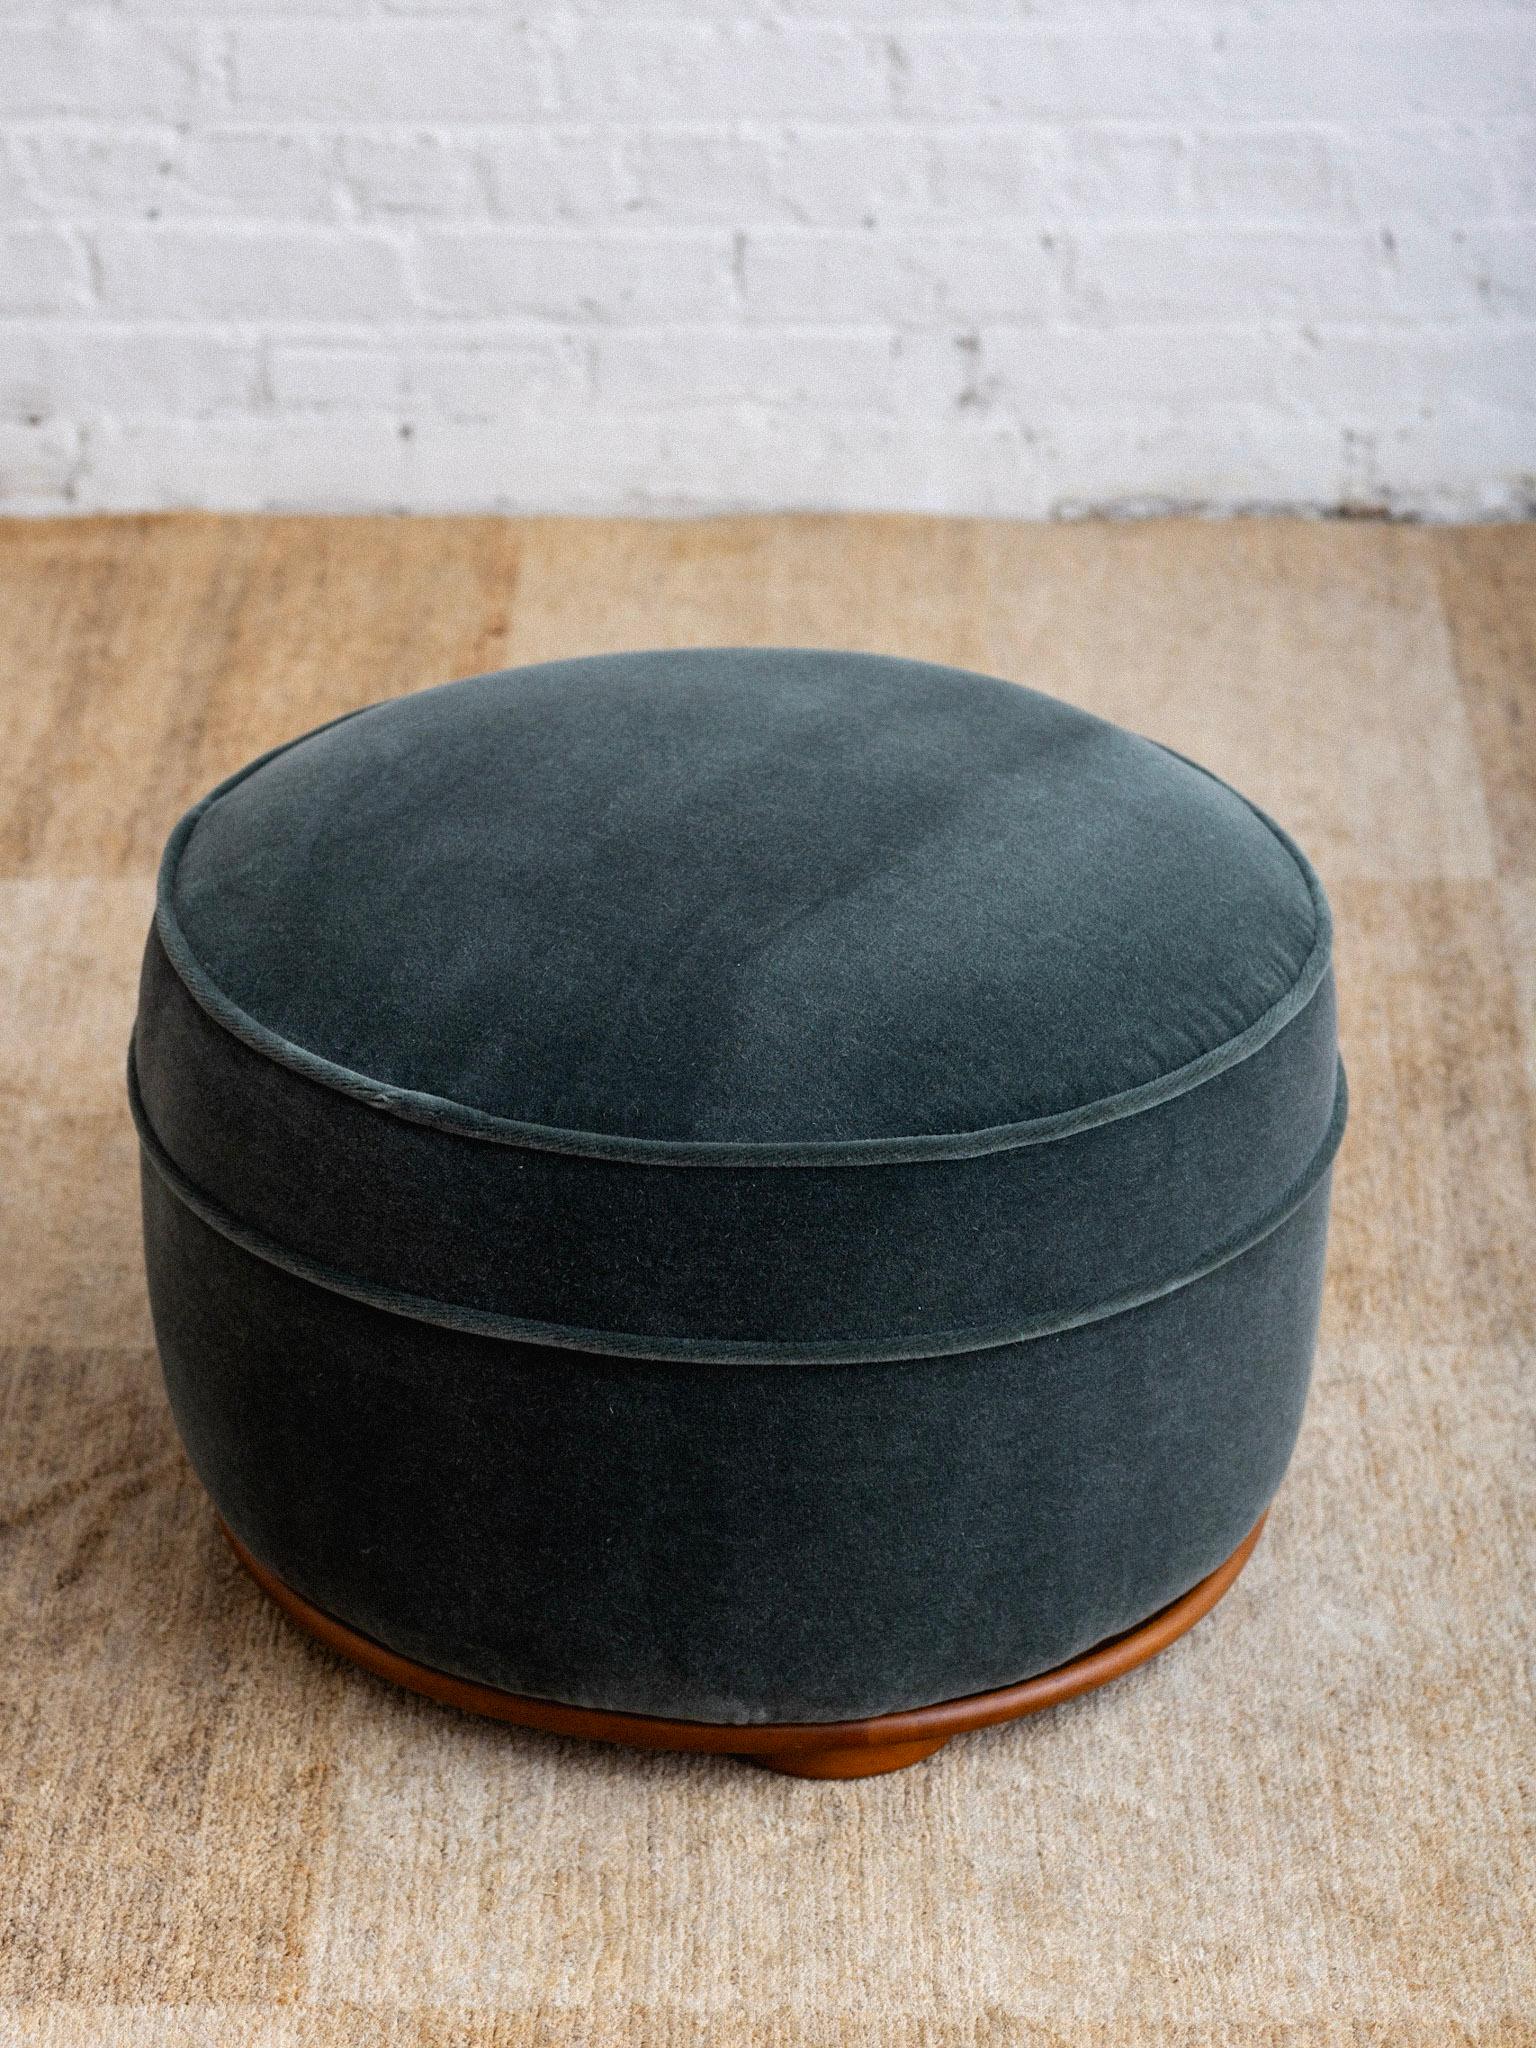 A French Art Deco ottoman. Newly upholstered in a dark teal mohair retaining the original inner spring suspension. Wood base with round disc feet. French import sticker remains.